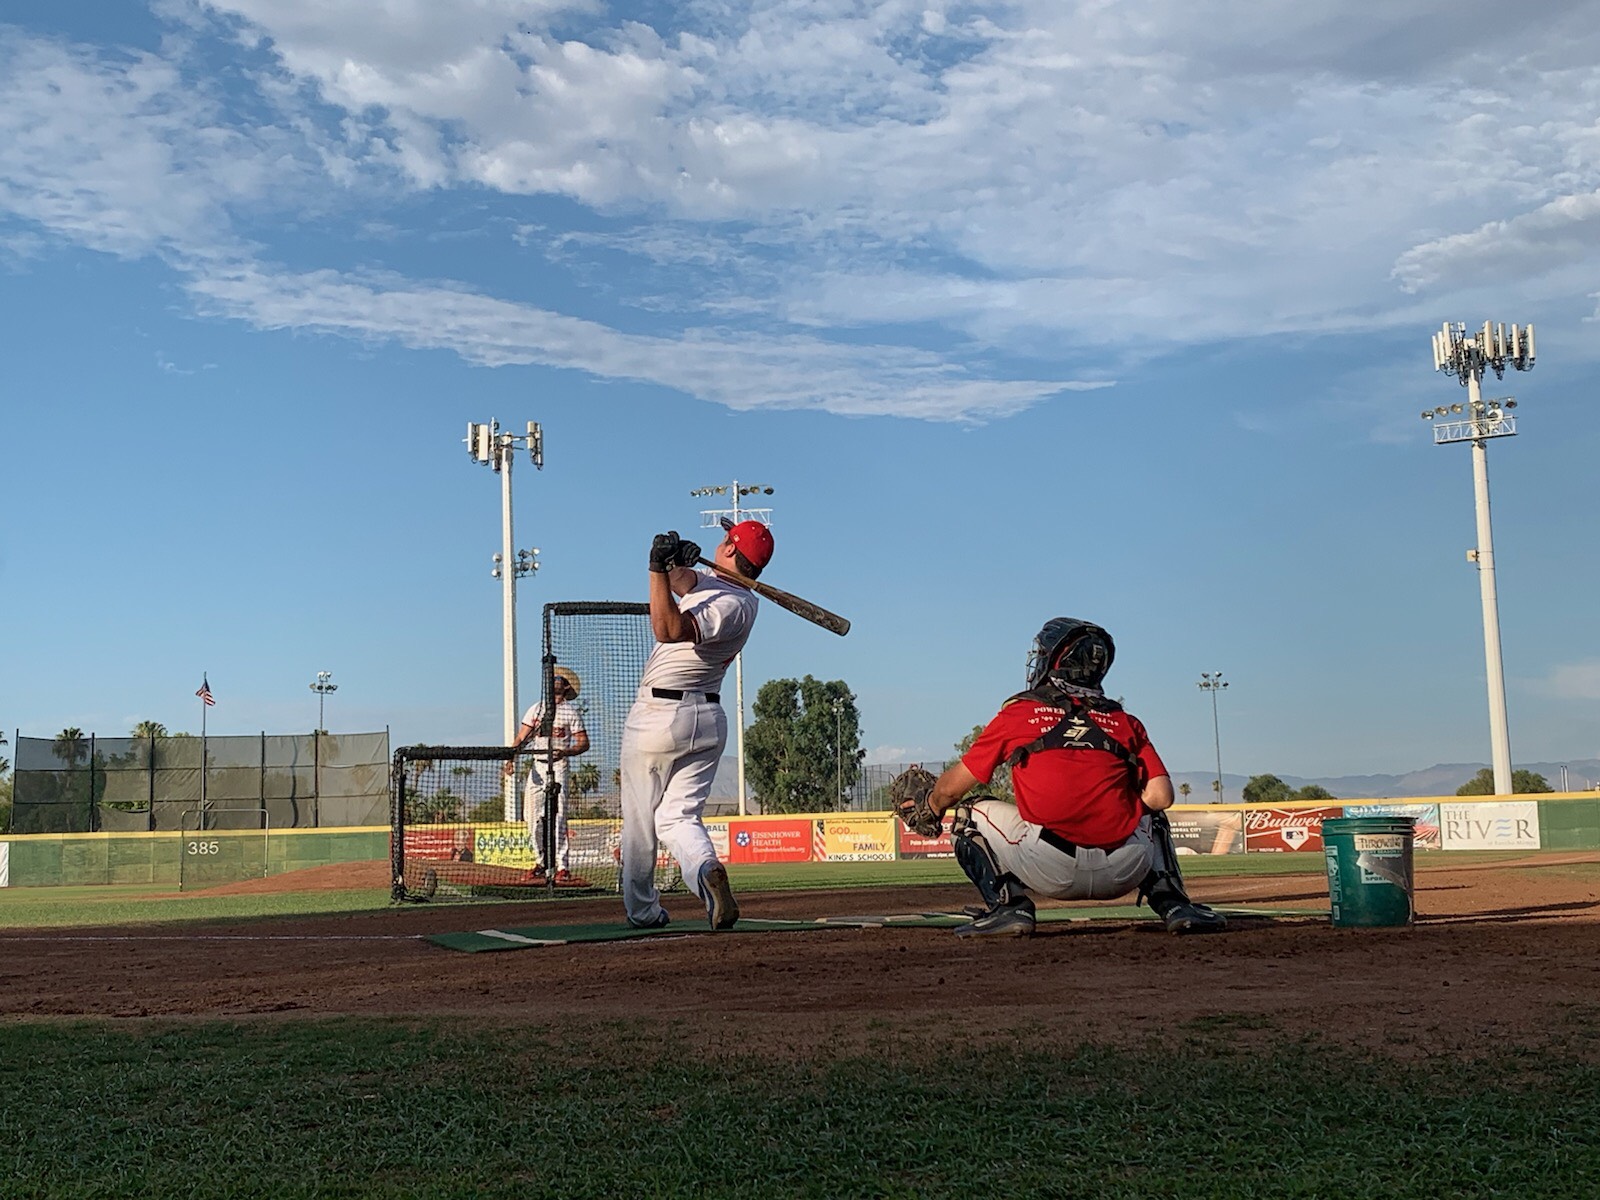 Sepede Runner-Up in Thrilling Home Run Derby, East Triumphant in 2019 SCCBL All-Star Game